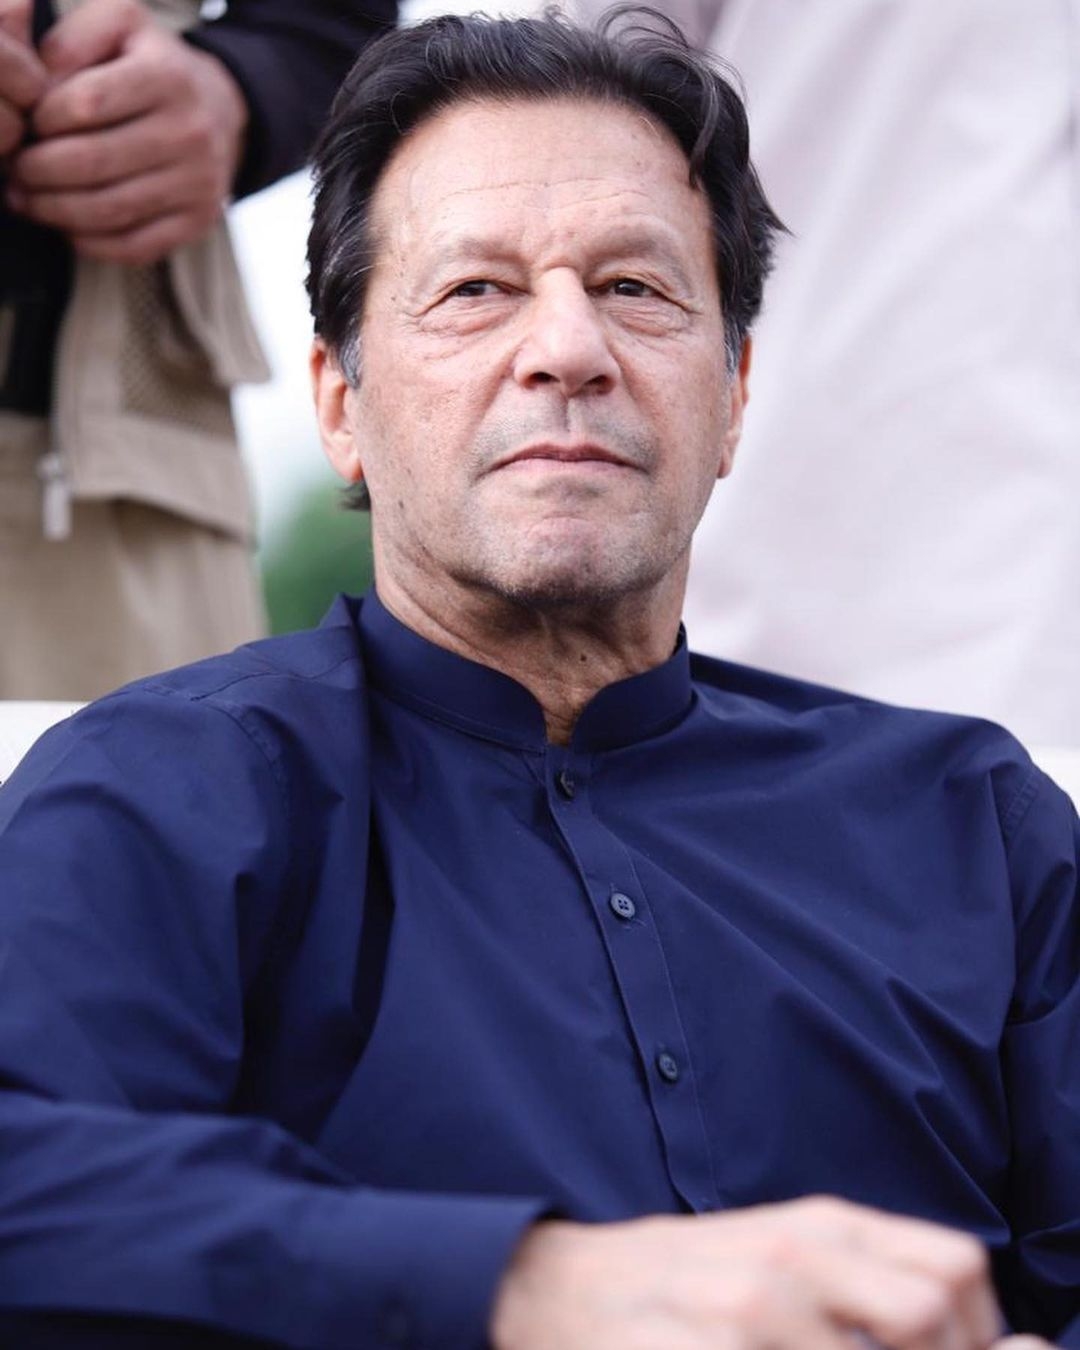 Us State Department Encouraged Pakistan Govt To Remove Imran Khan As Pm Report India Tribune